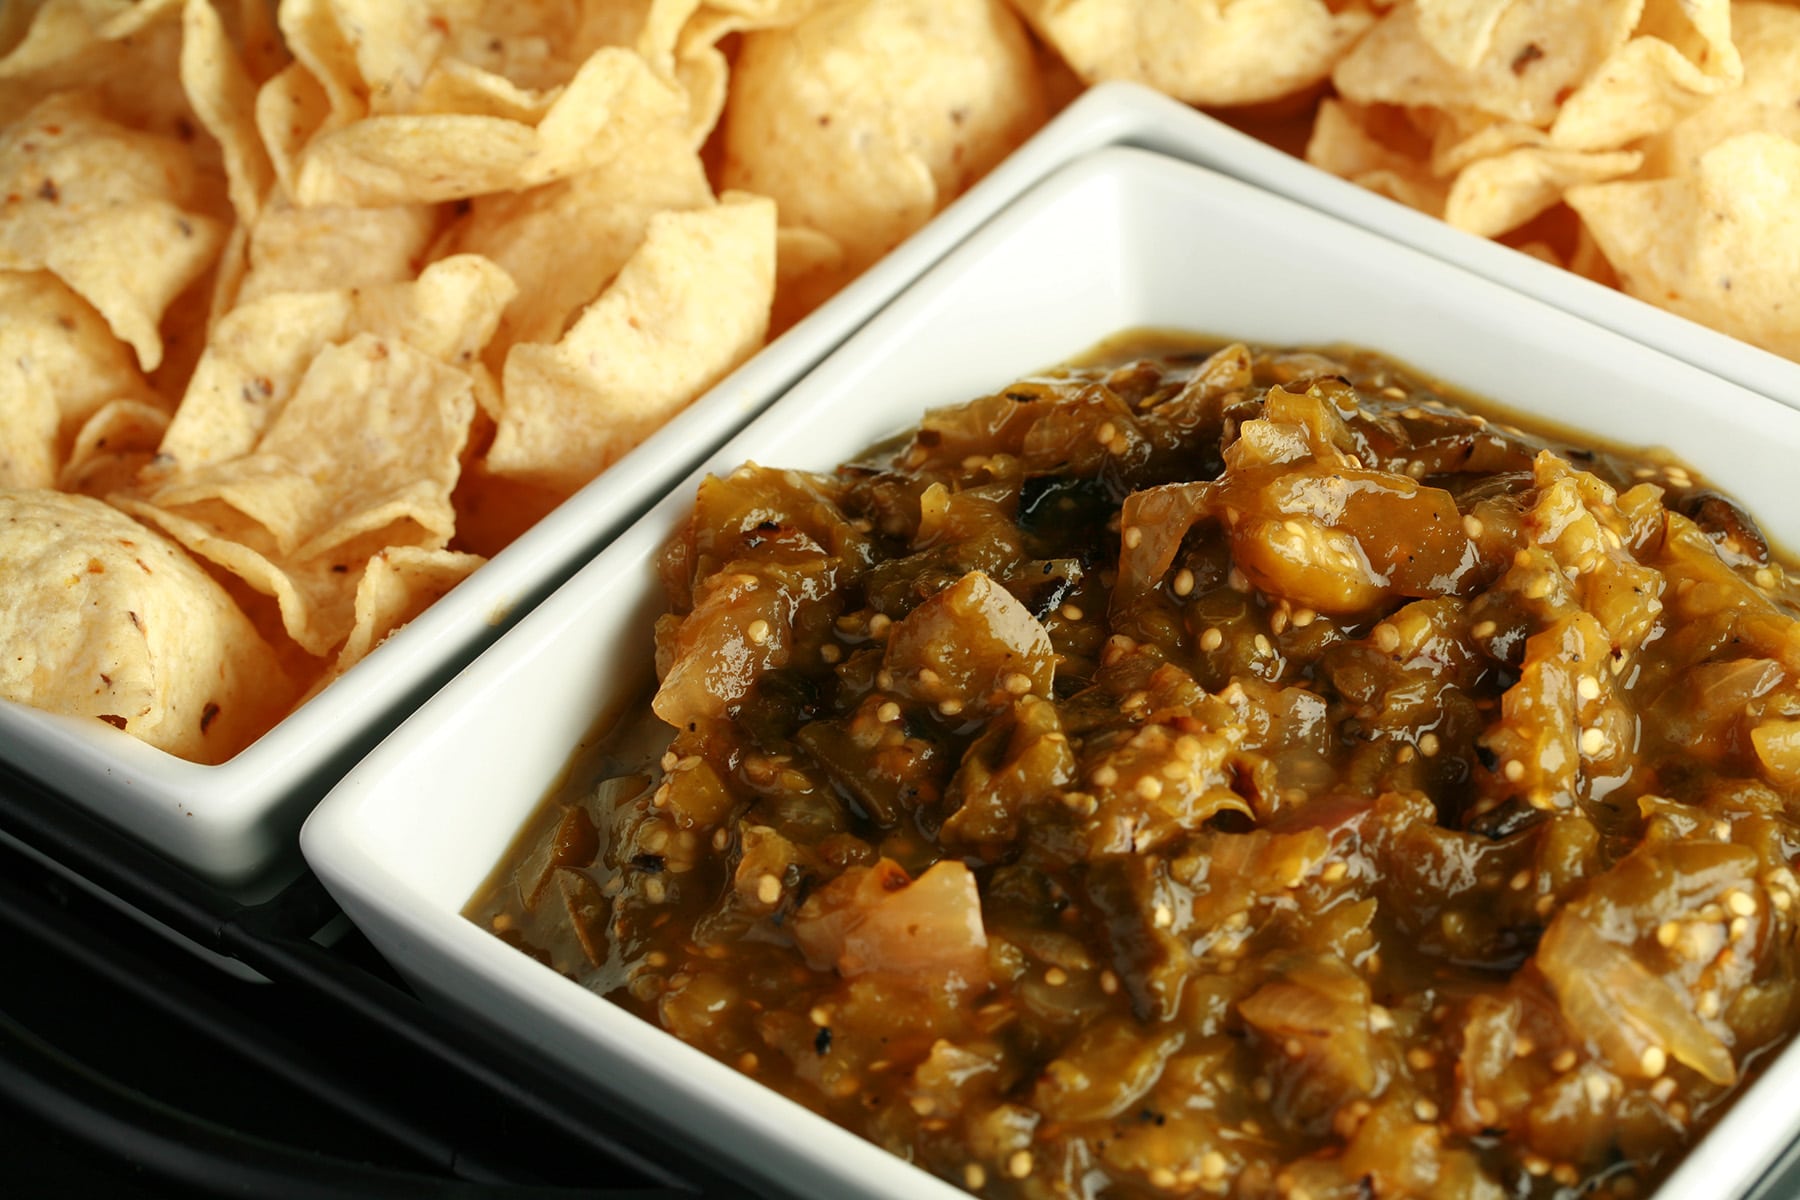 A large square bowl of roasted salsa verde, surrounded by white corn chips.